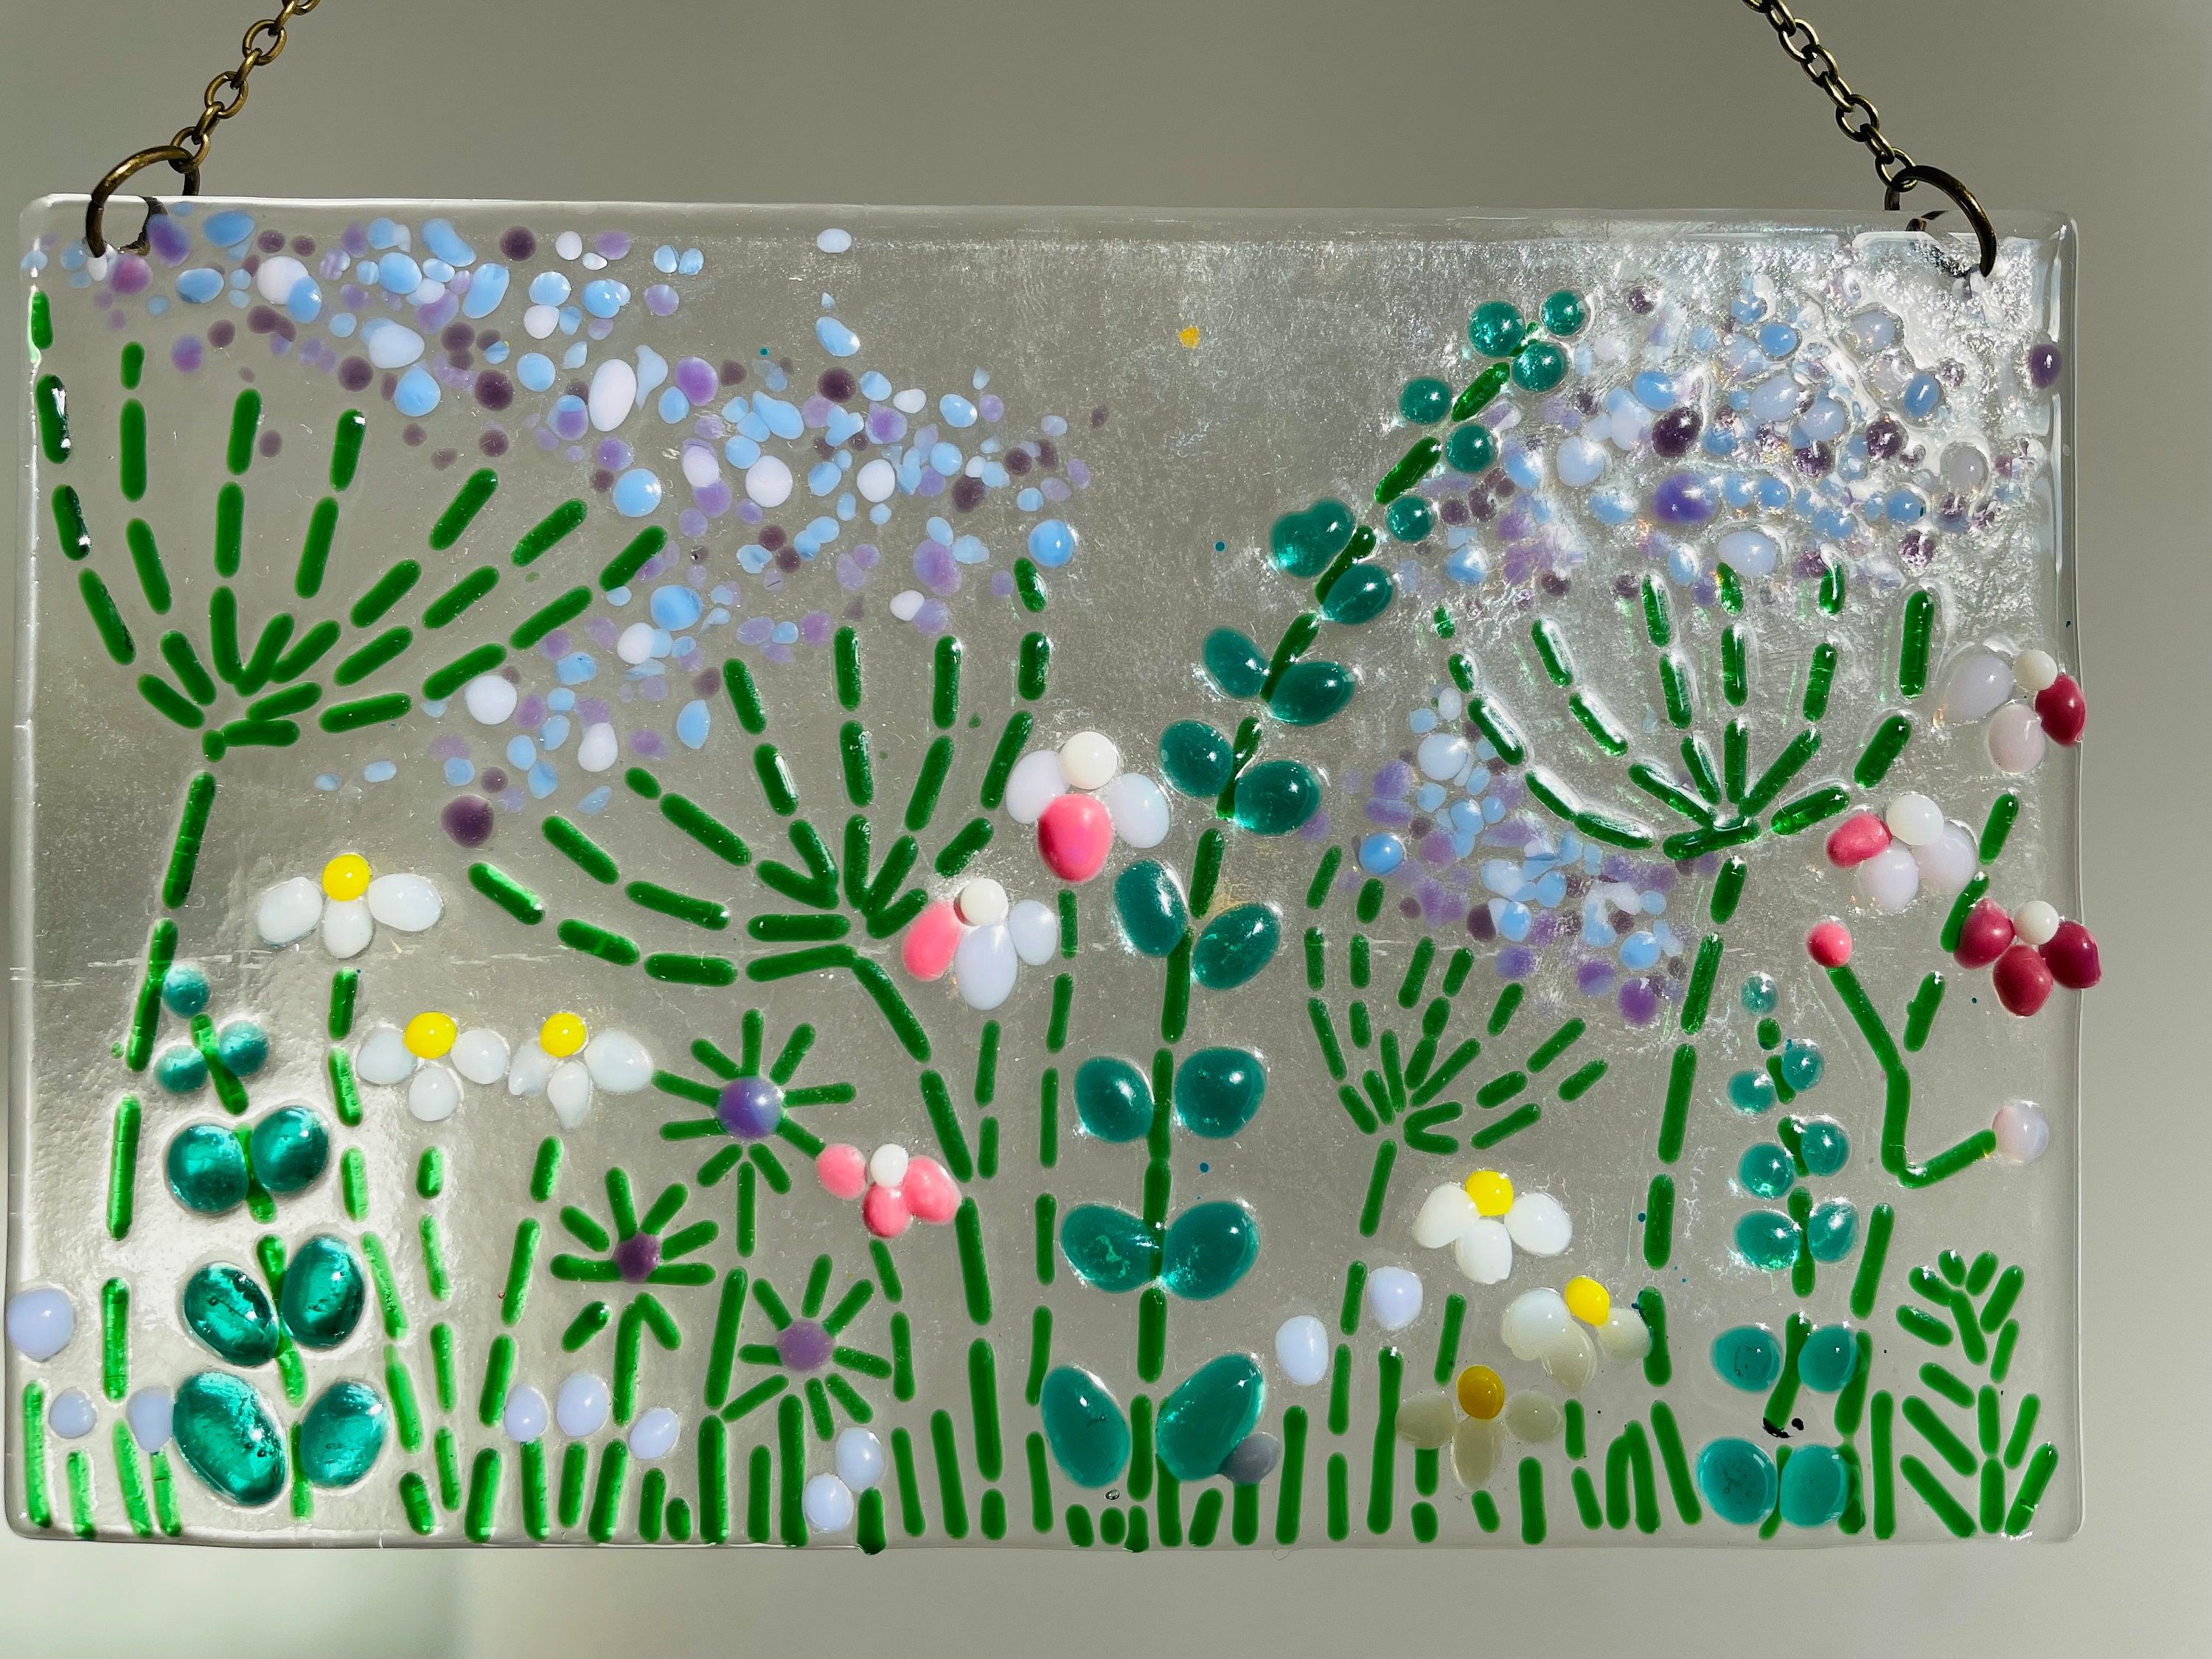 Make At Home Fused Glass Sun-Catcher Kit by molten wonky